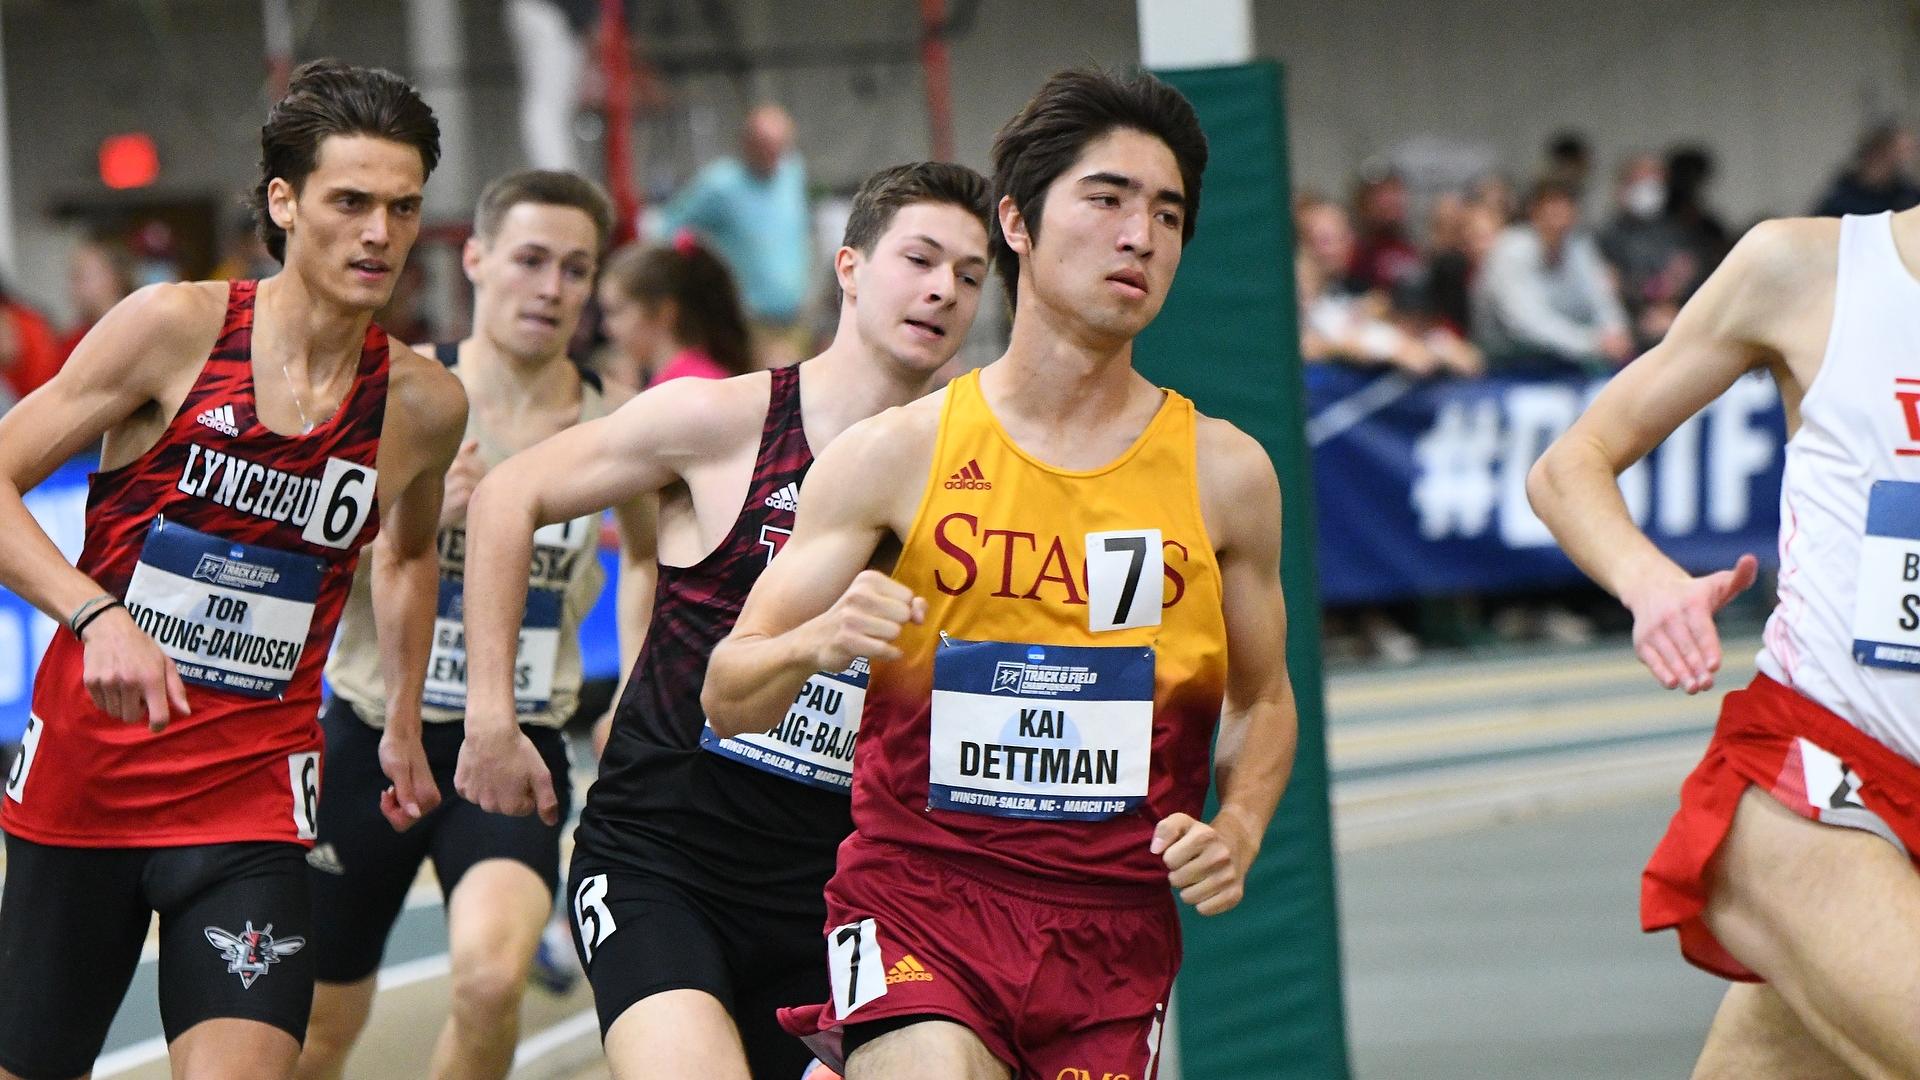 Kai Dettman was one the 11 Stags honored by the USTFCCCA